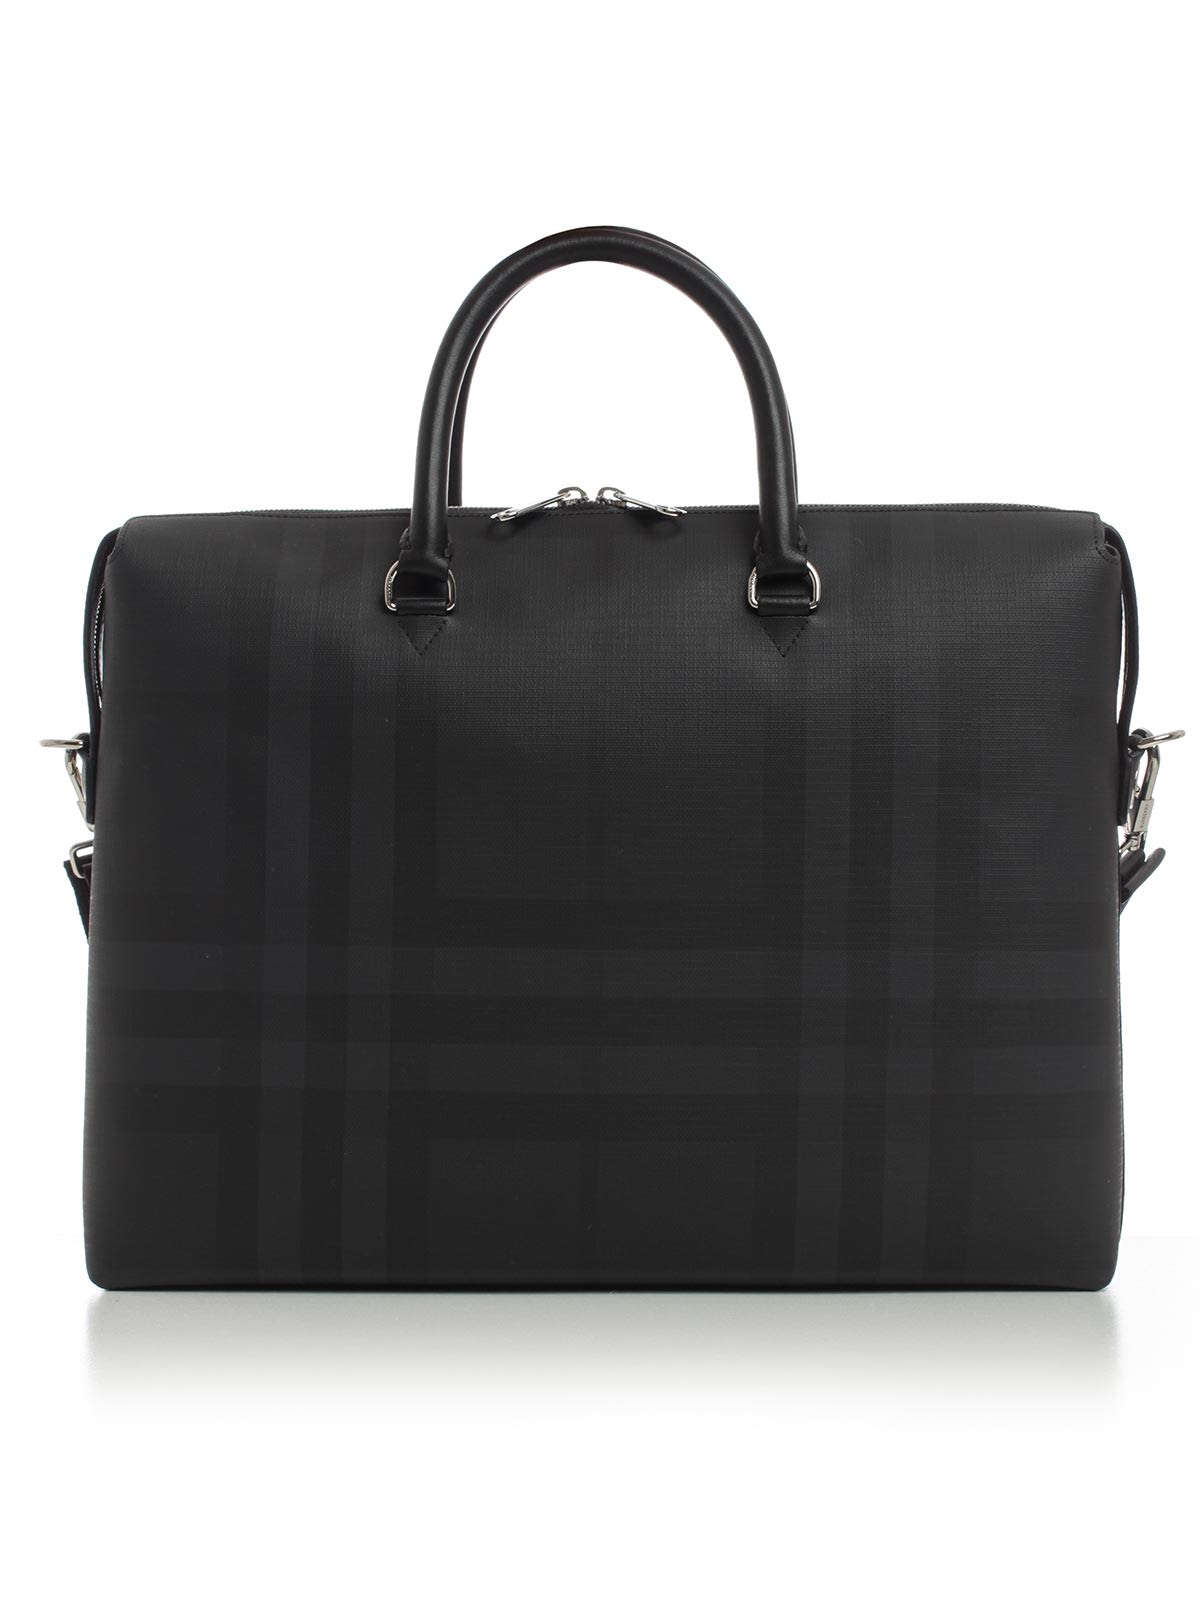 Burberry Briefcase In Dark Charcoal | ModeSens